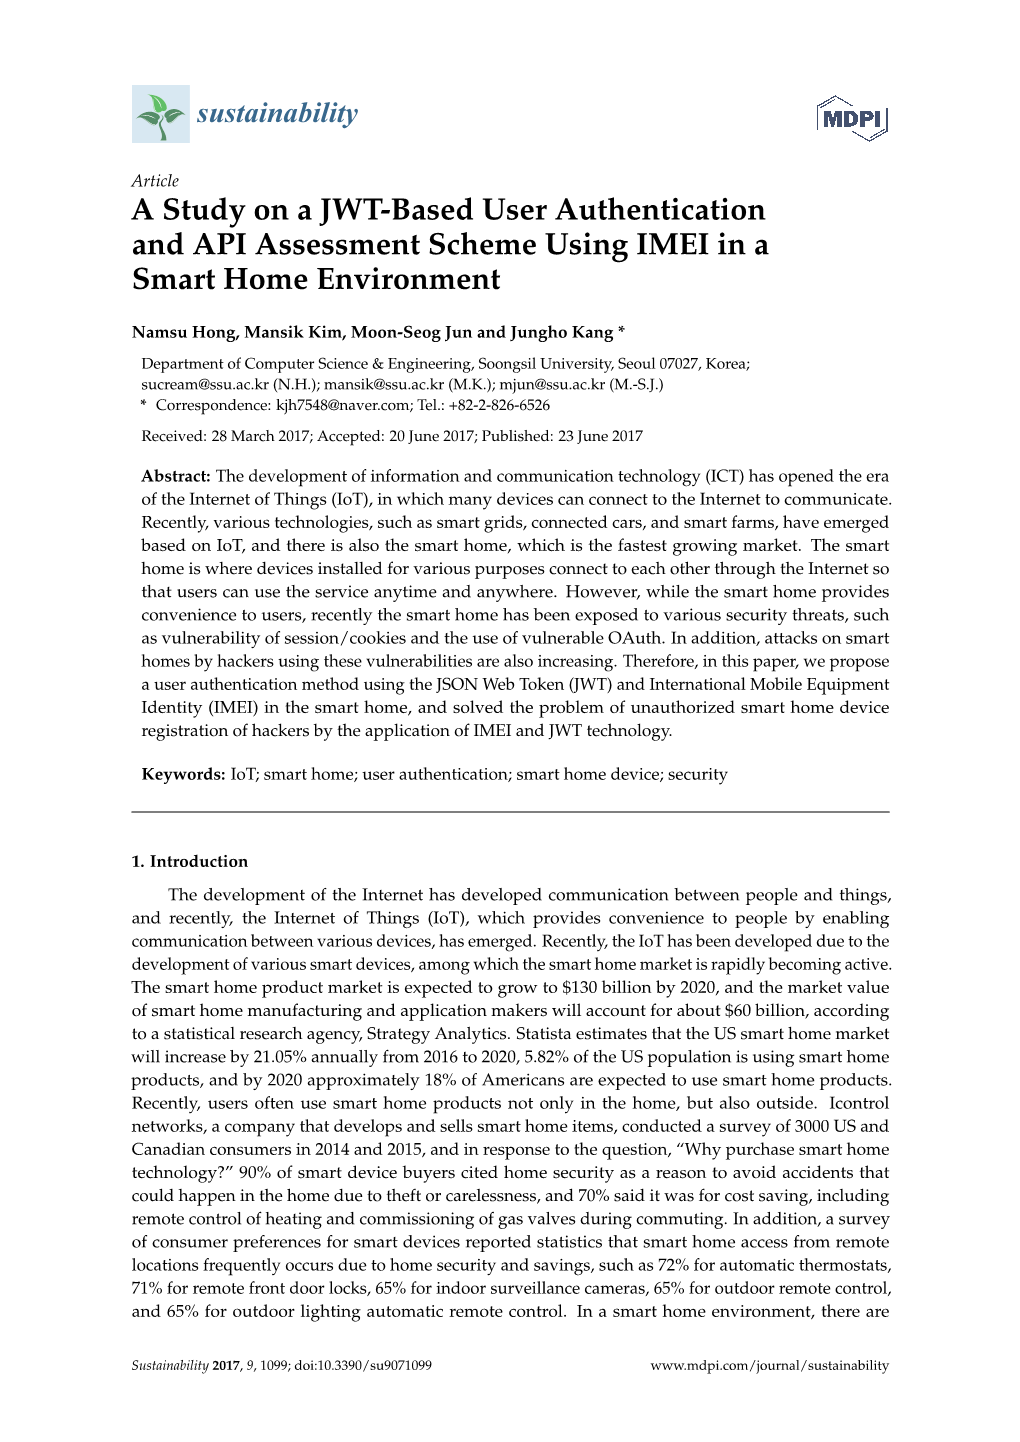 A Study on a JWT-Based User Authentication and API Assessment Scheme Using IMEI in a Smart Home Environment